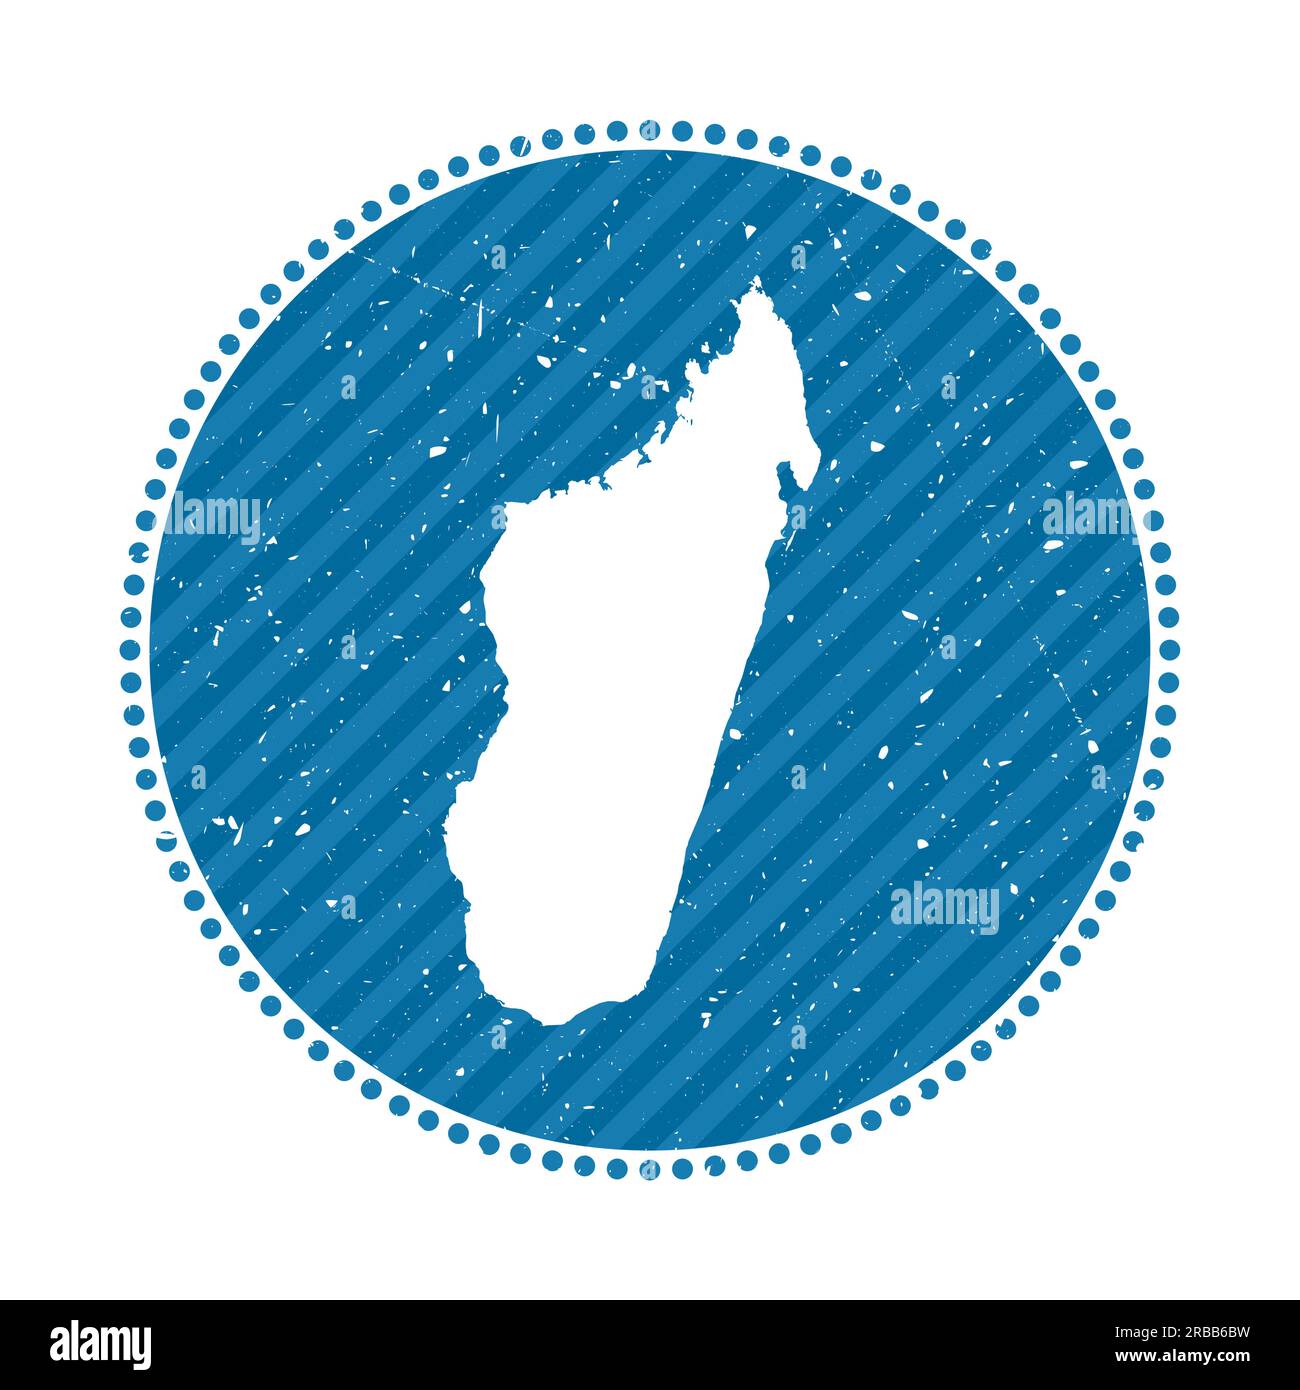 Madagascar striped retro travel sticker. Badge with map of country, vector illustration. Can be used as insignia, logotype, label, sticker or badge of Stock Vector